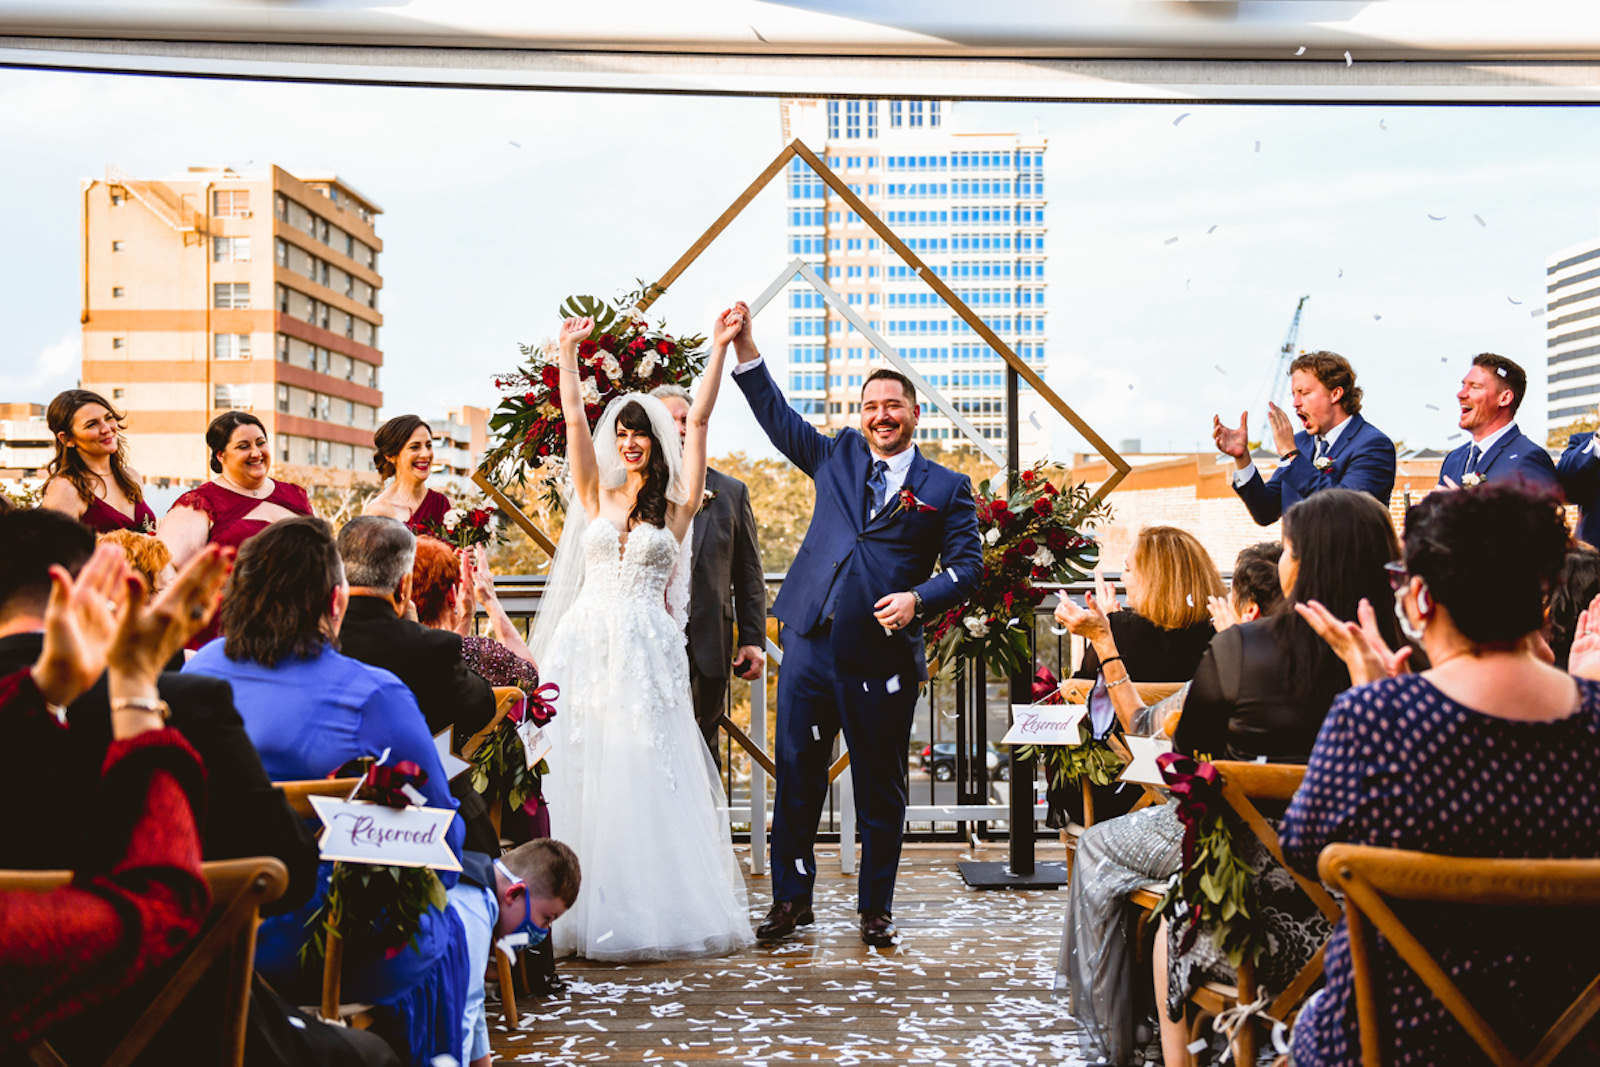 Bride and Groom After Saying I Do During Rooftop Ceremony in Front of Geometric Sculpture Confetti Photo | Tampa Bay Wedding Planner Special Moments Event Planning | Downtown St. Pete Wedding Venue Red Mesa Events